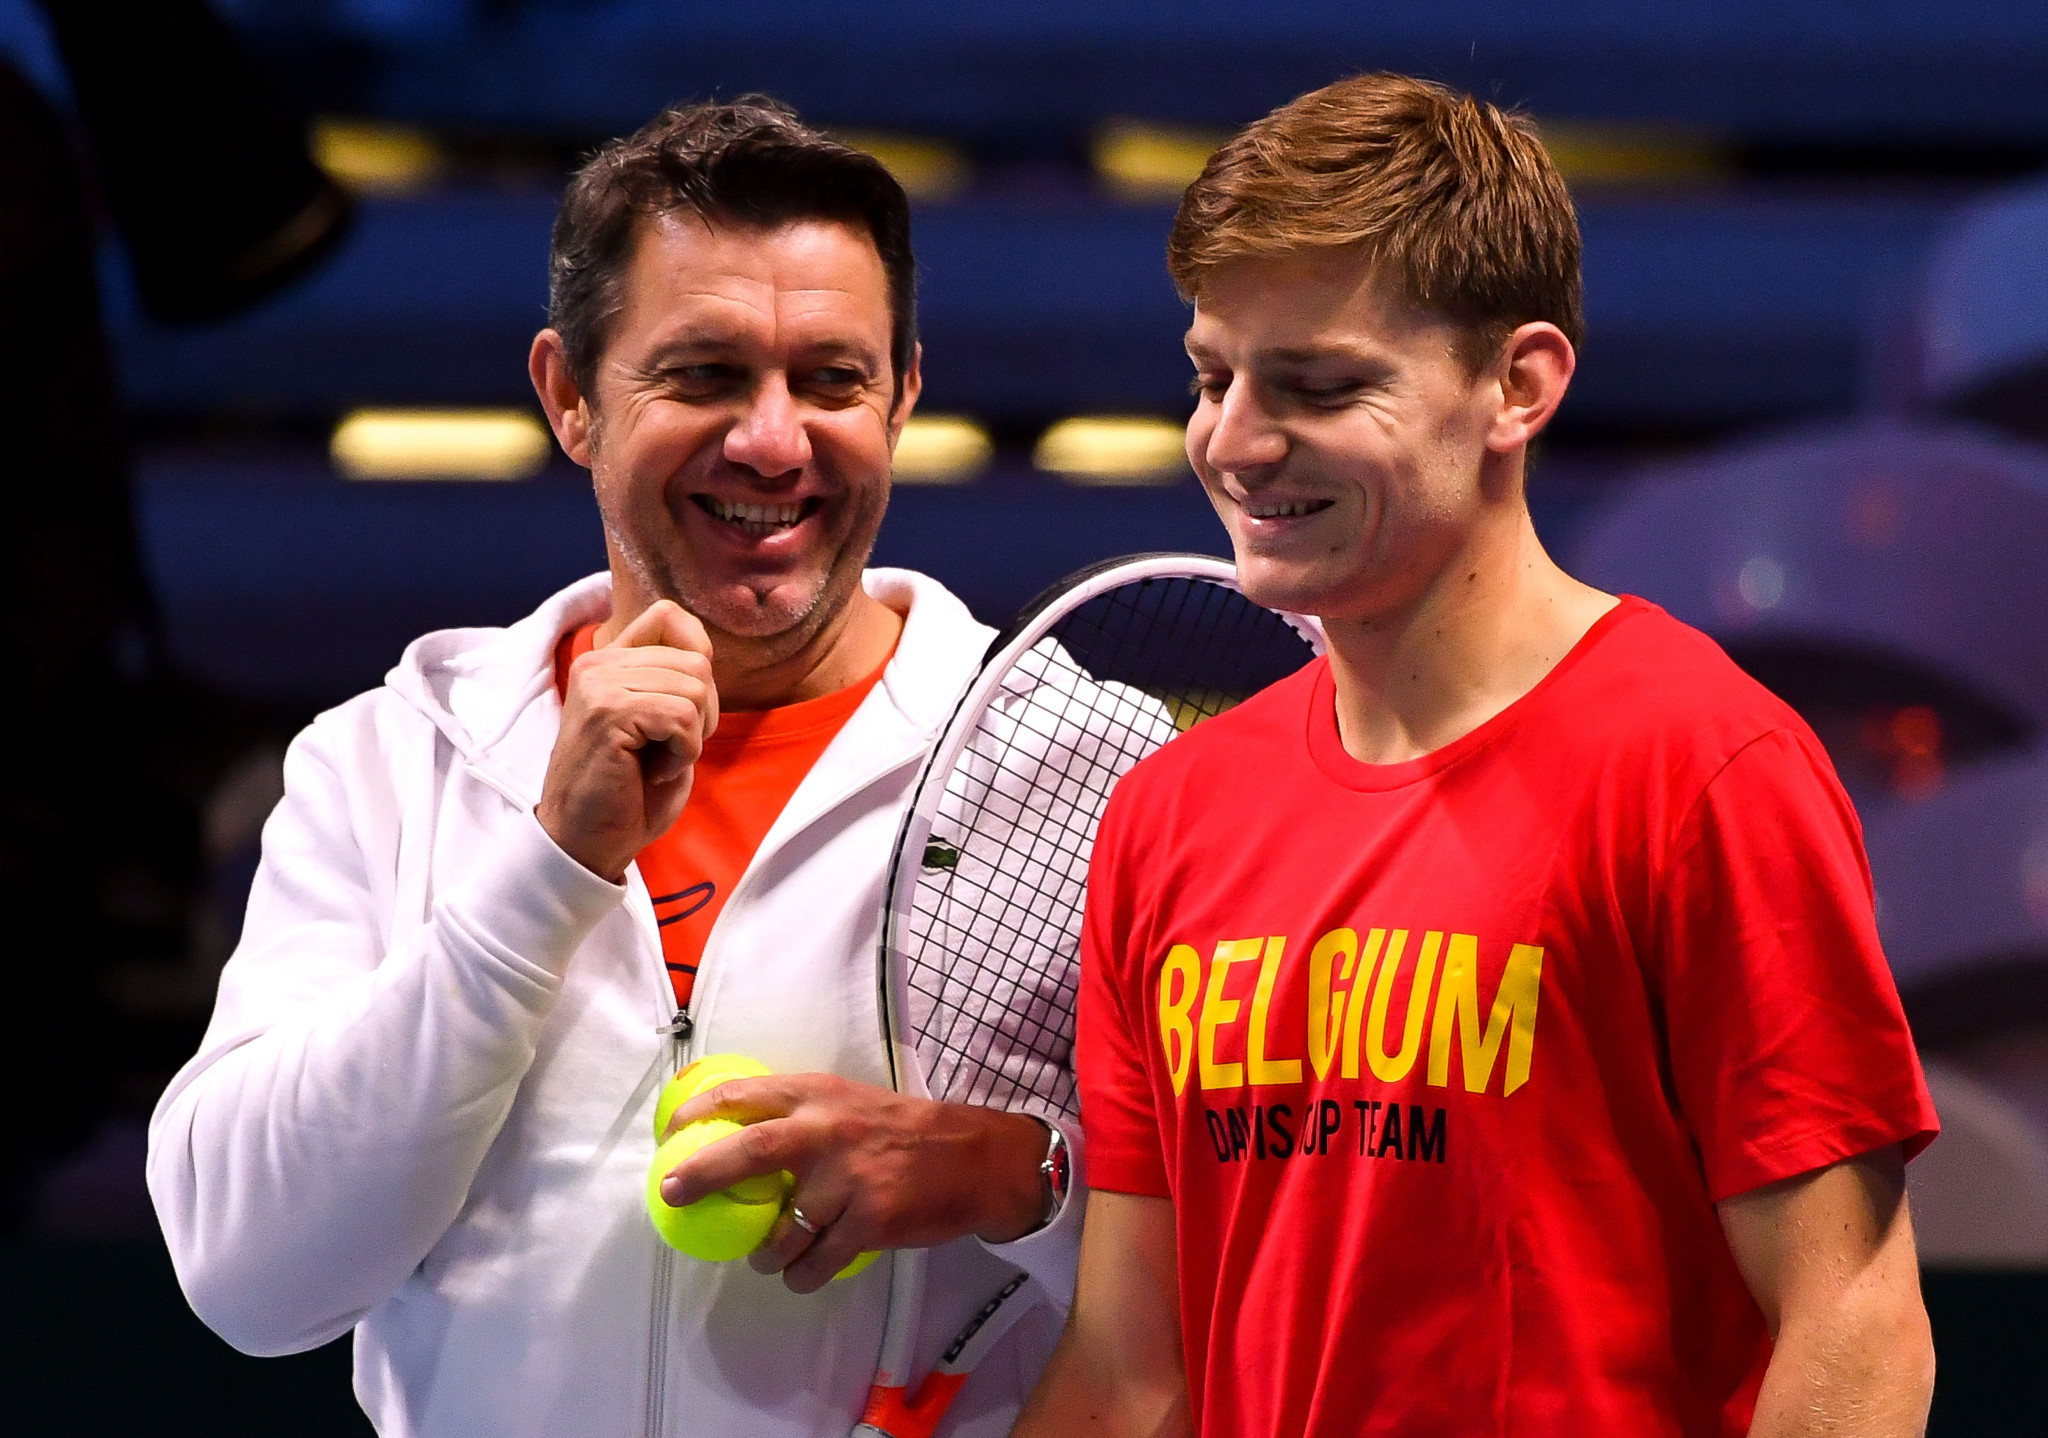 Belgium Davis Cup team coach Thierry Van Cleemput, left, jokes with star player David Goffin during a training session at the Pierre-Mauroy stadium ahead of the World Group final between France and Belgium ©Getty Images